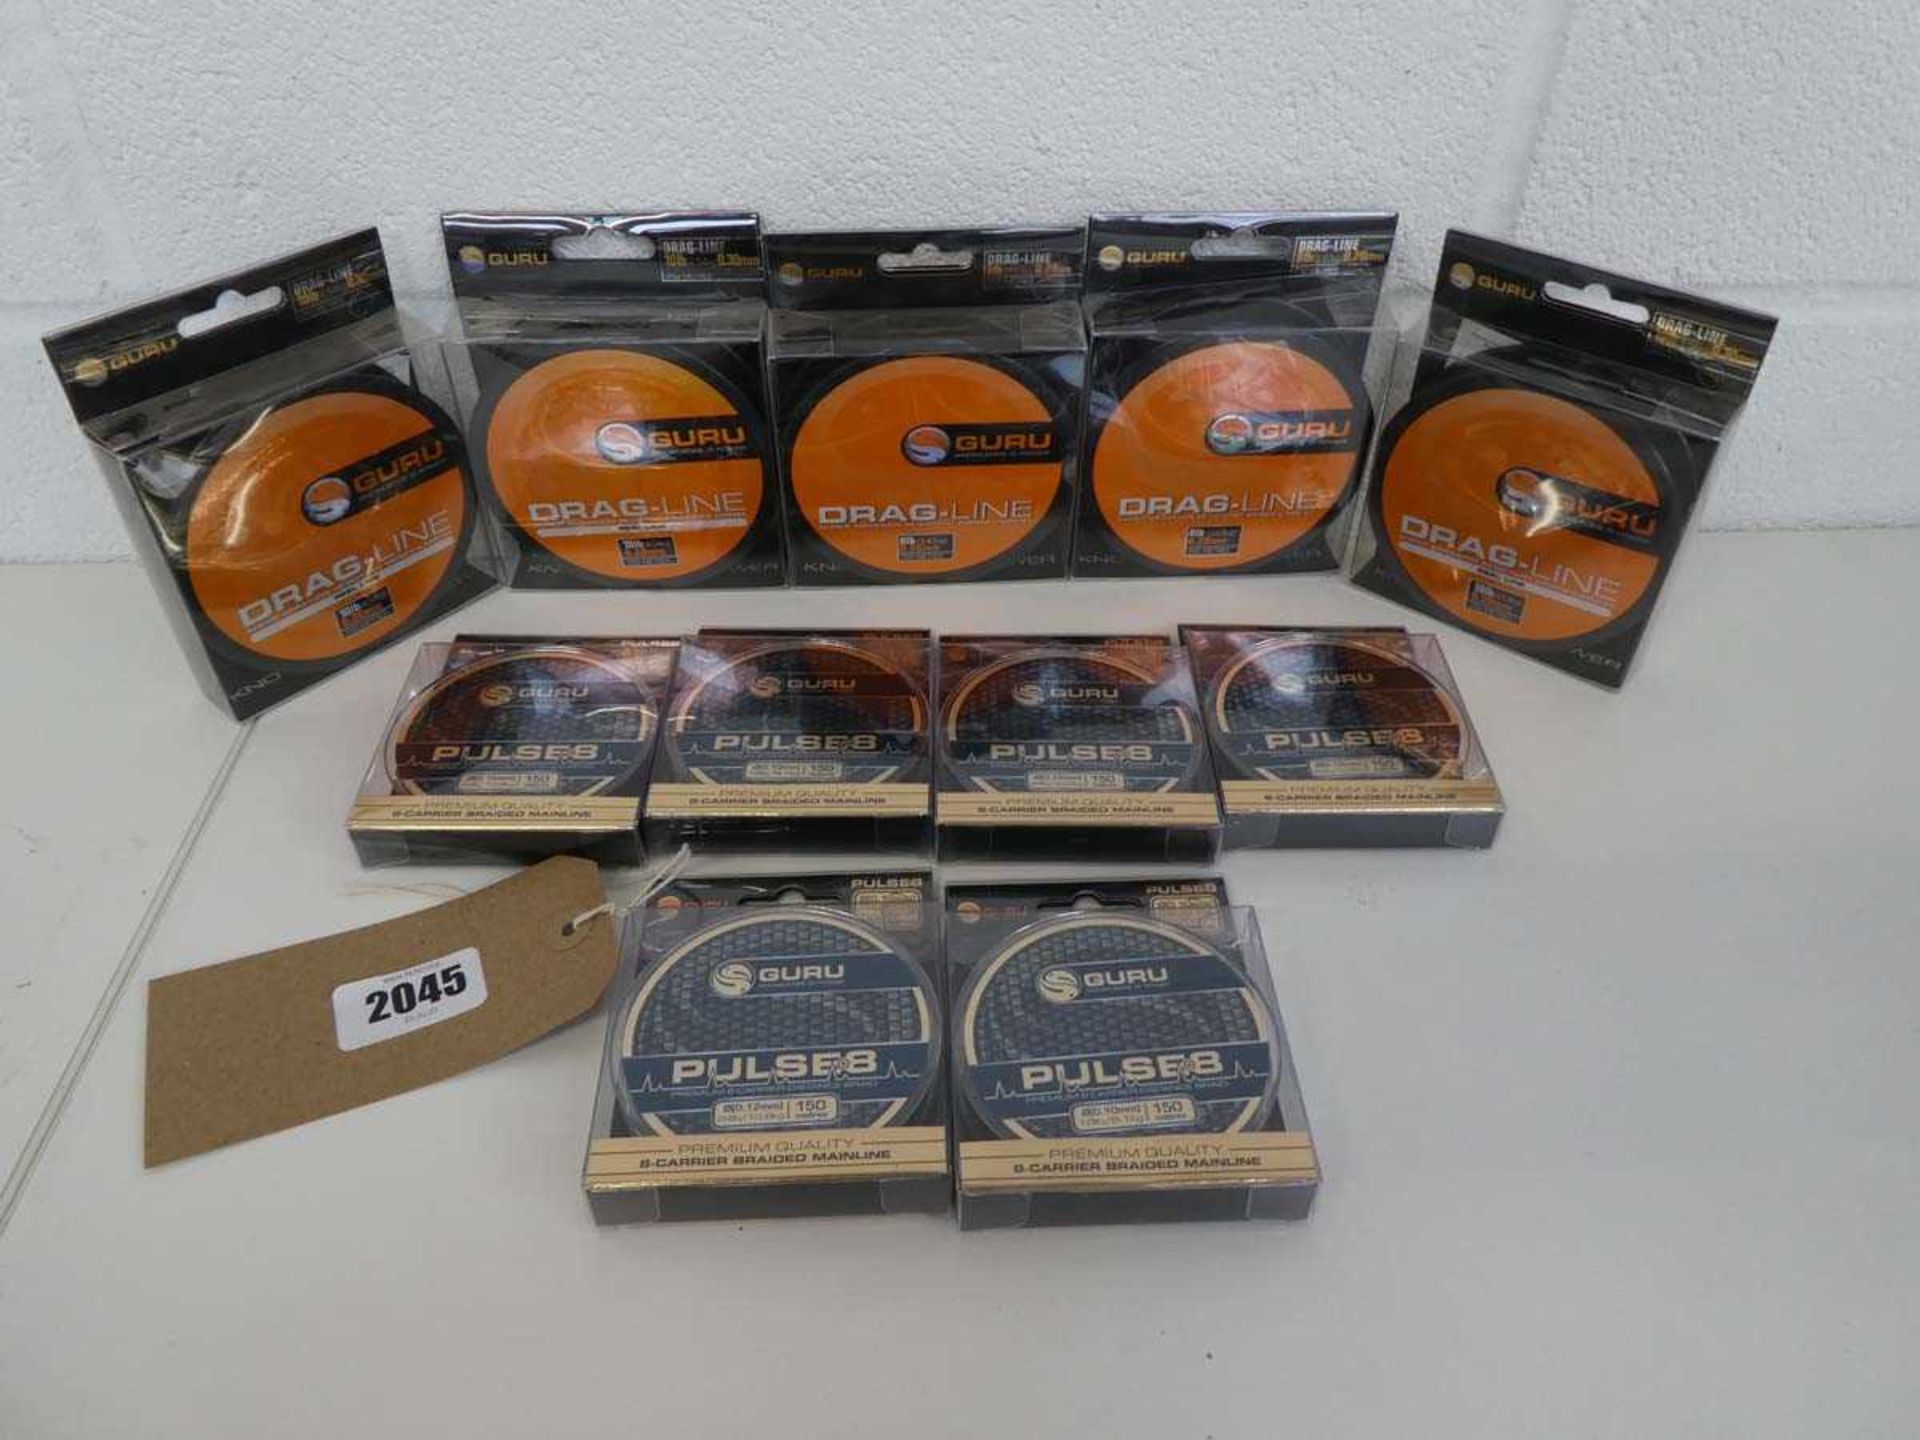 Quantity of Guru fishing line incl. monofilament drag-line in breaking strains 10 and 8lb with 6